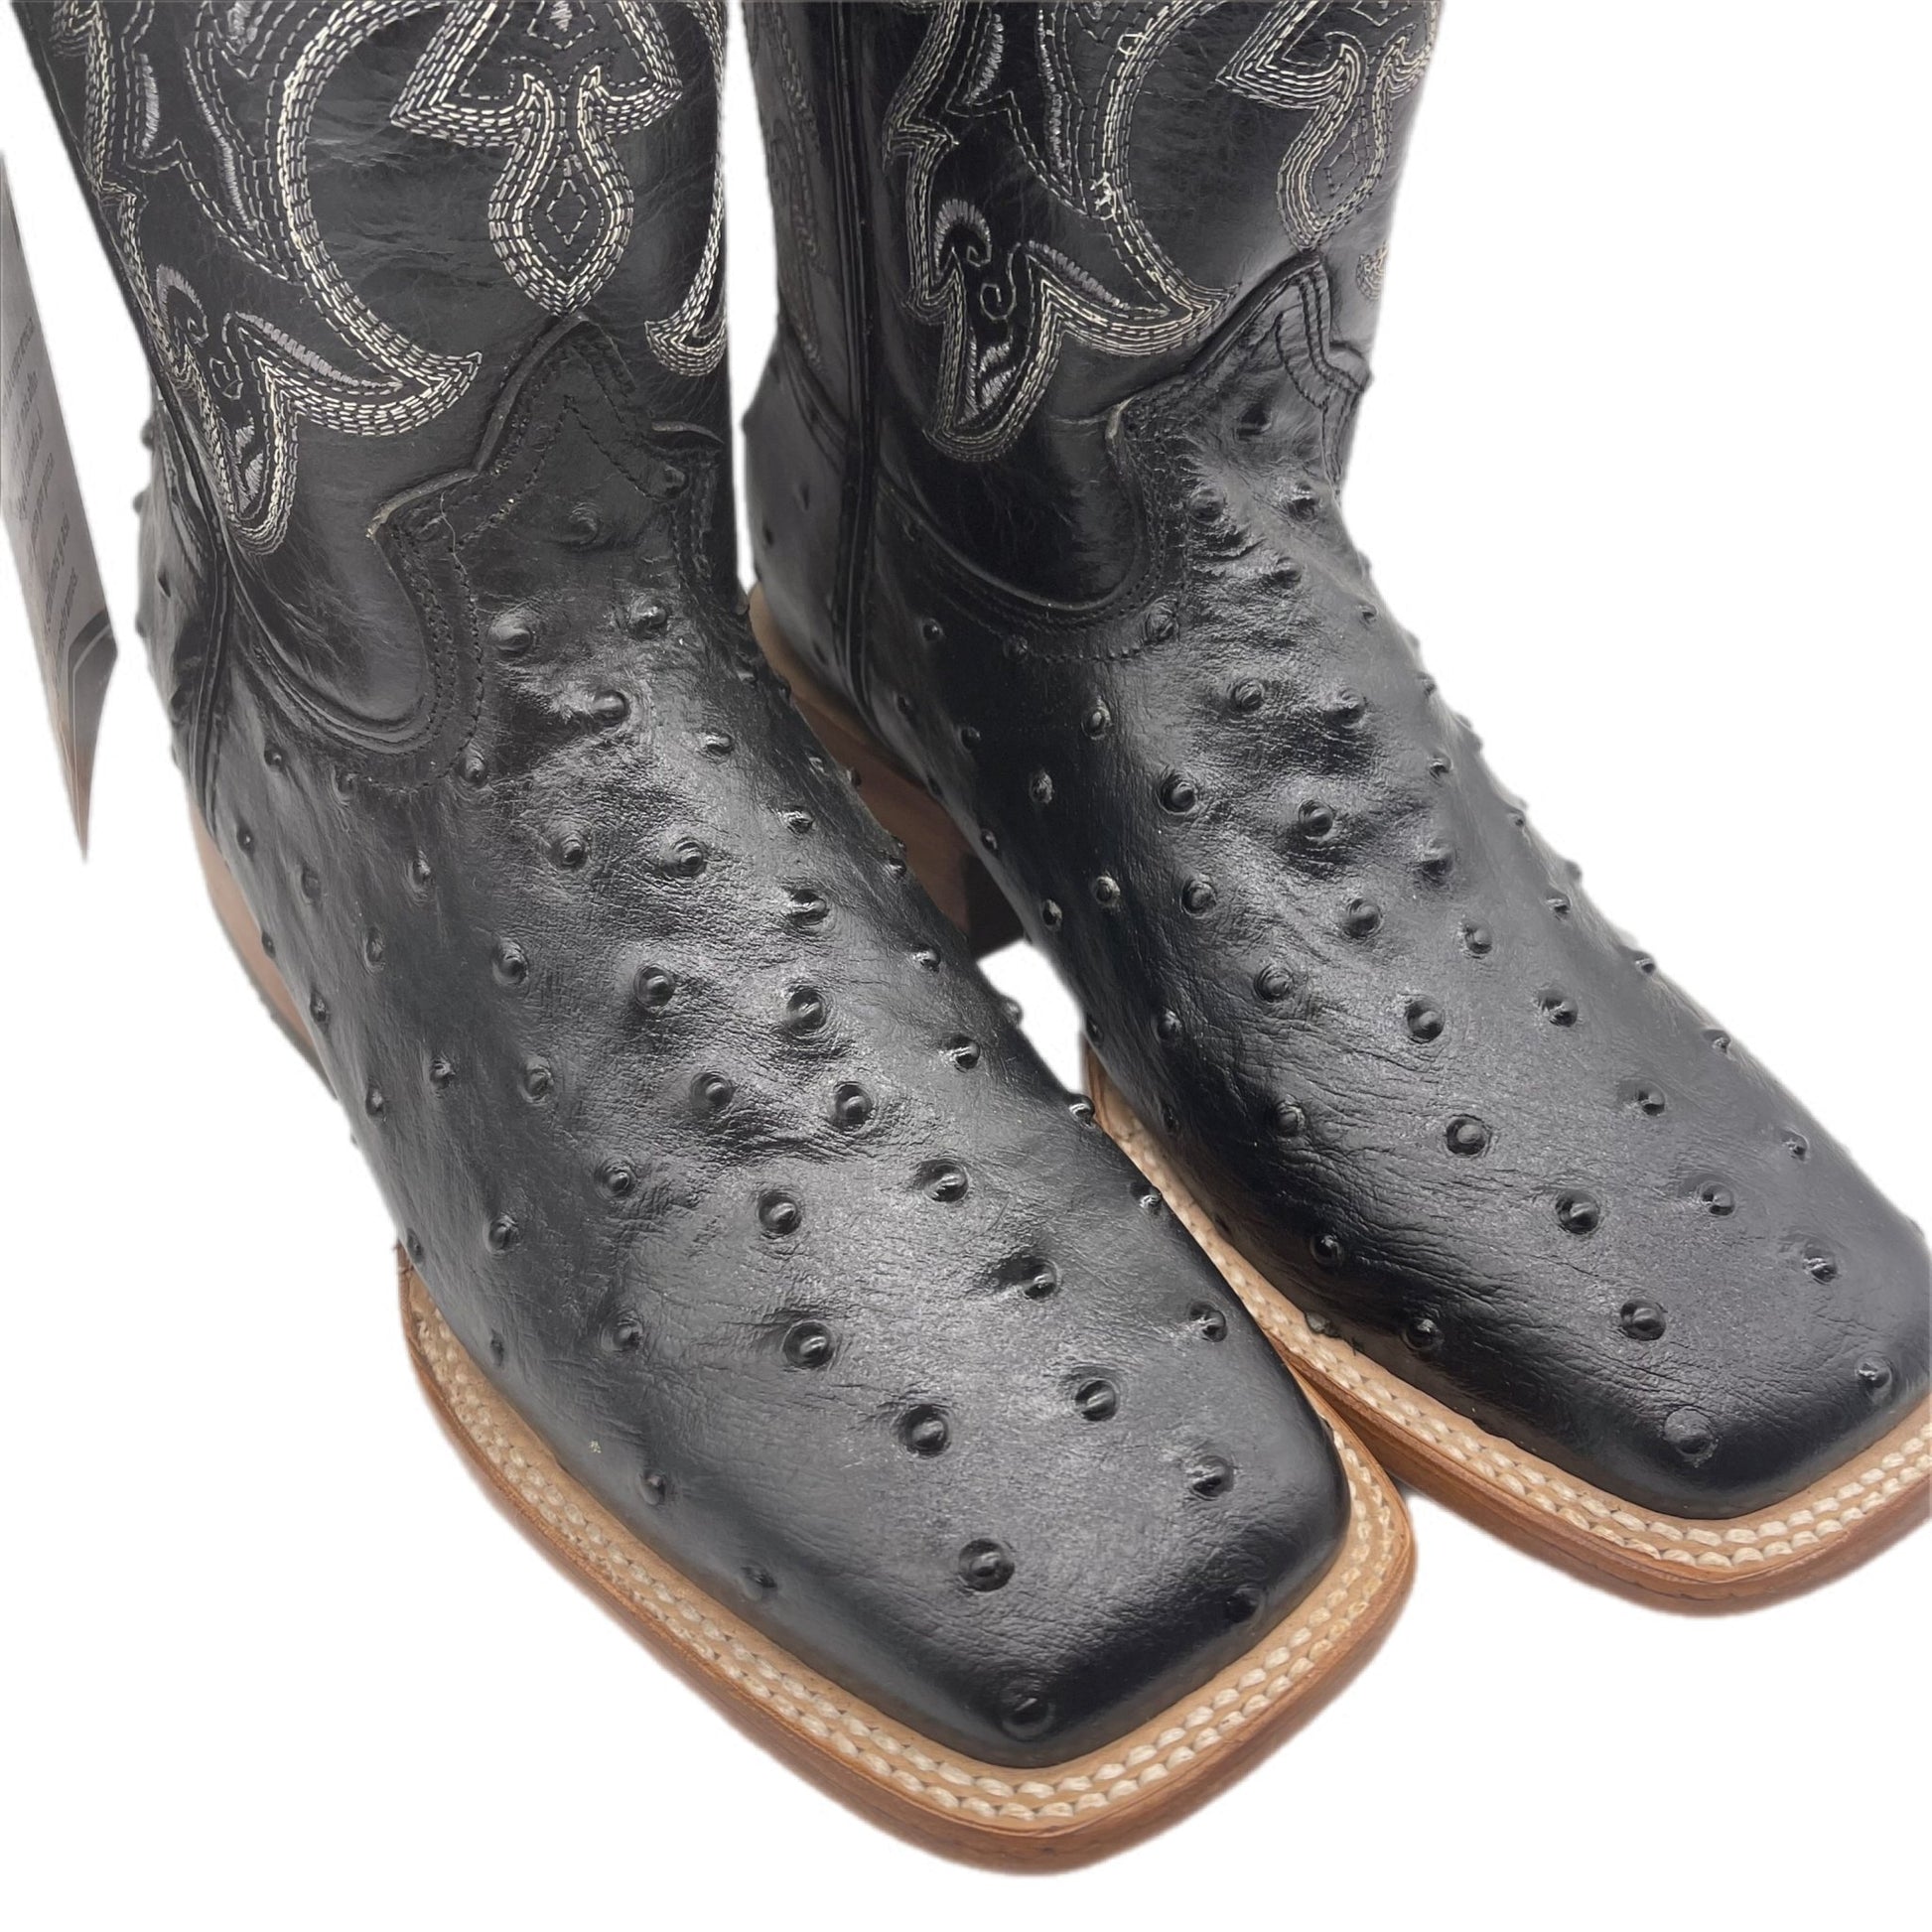 Black Leather Boots with Textured Design - Frontera Western Wear